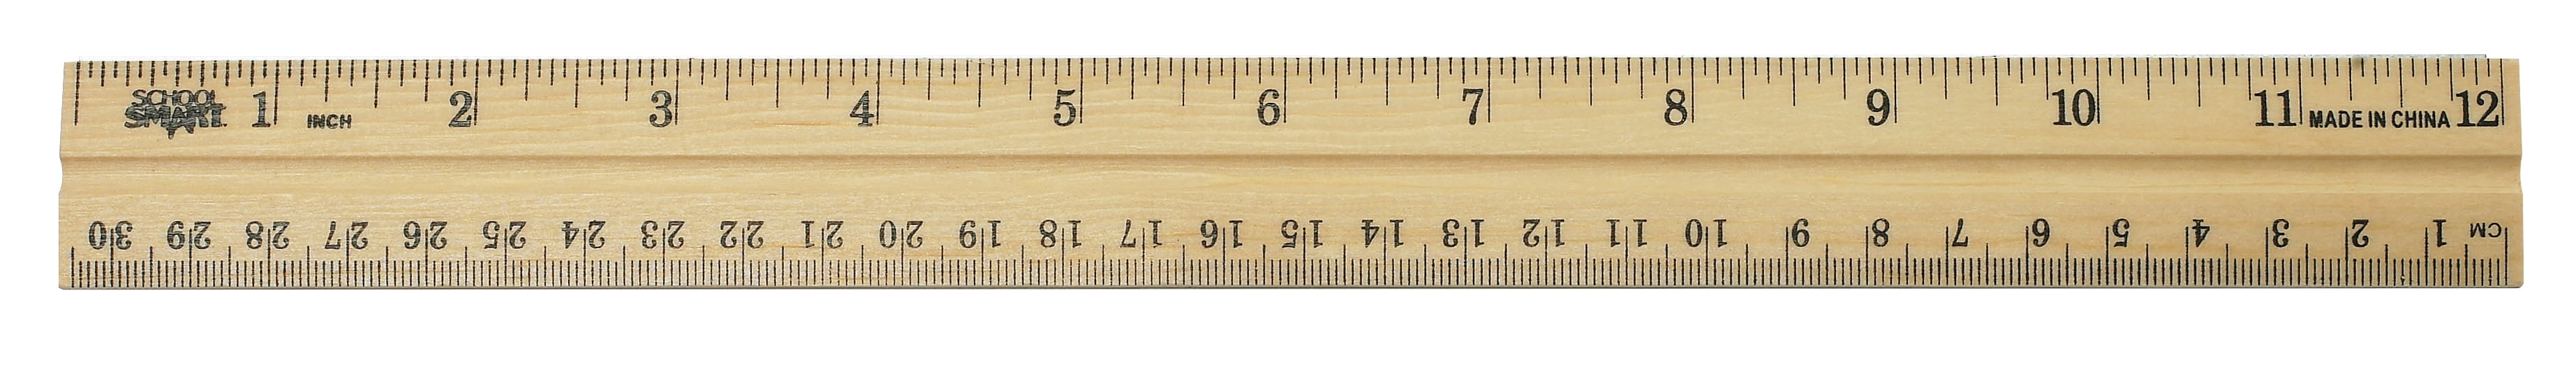 12 X 1-1/8 5/32 Inches Office And Rulers School Smart Double Beveled Wood Ruler 